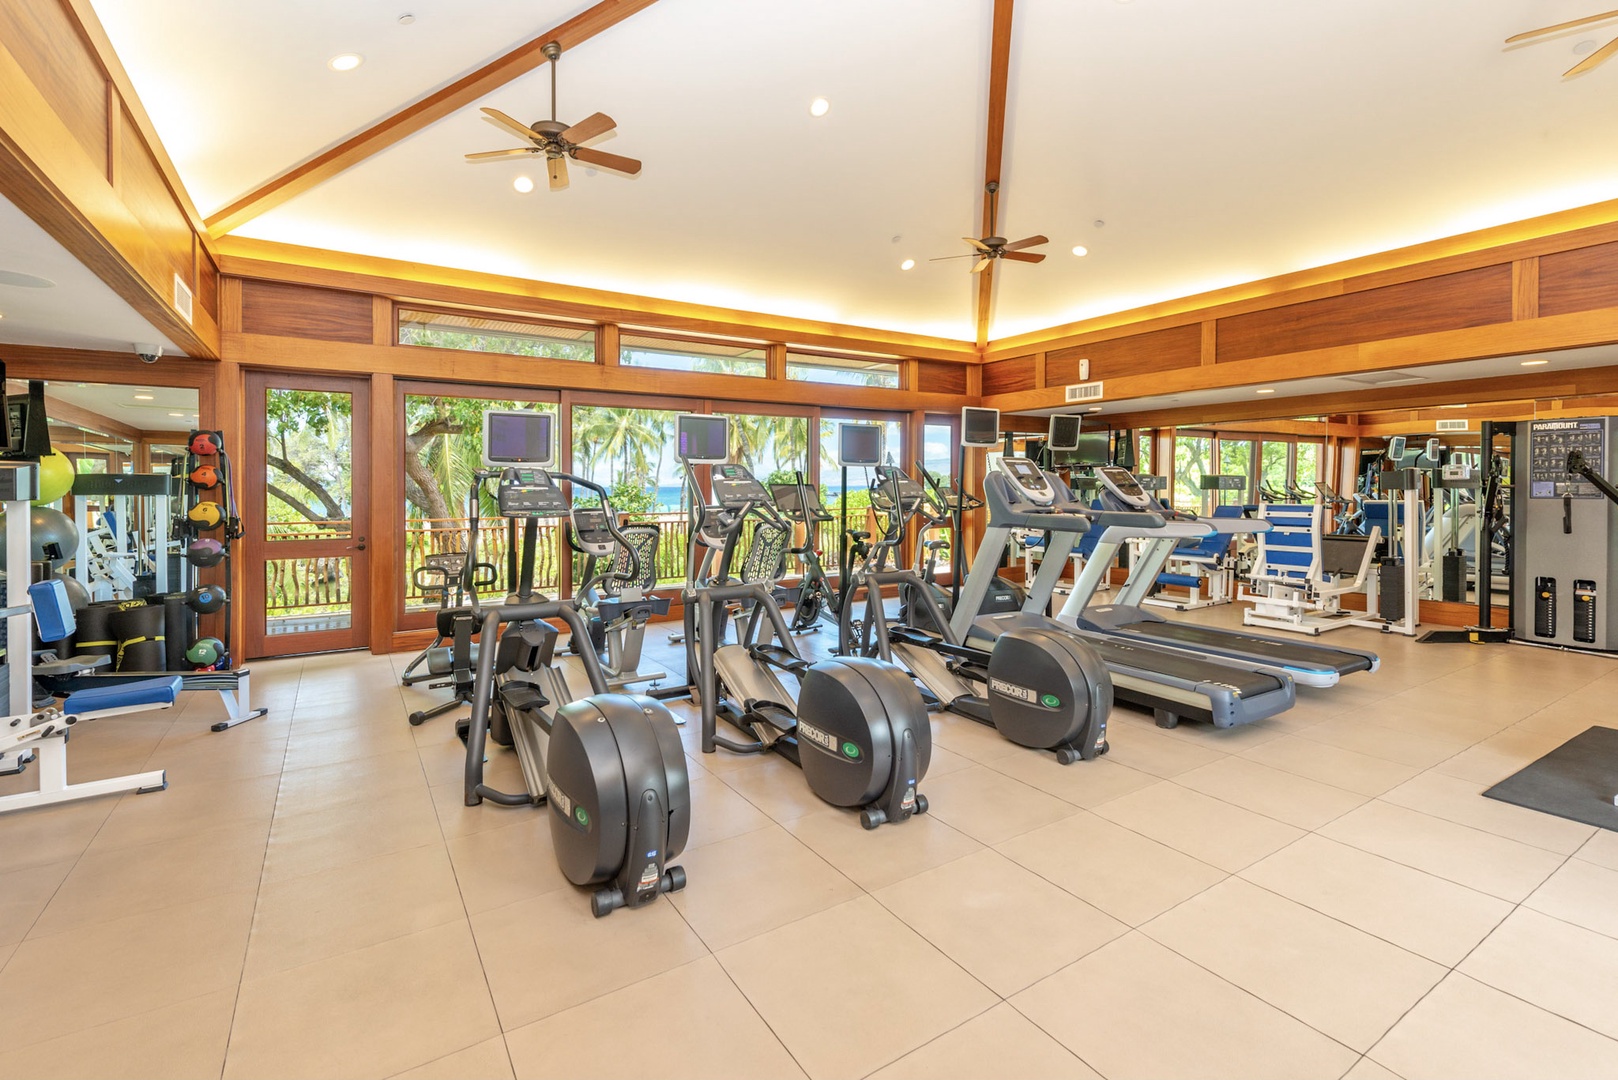 Kamuela Vacation Rentals, 3BD Na Hale 3 at Pauoa Beach Club at Mauna Lani Resort - Stay fit with ocean scenery in the fully equipped fitness room of Pauoa Beach Club Amenities Center